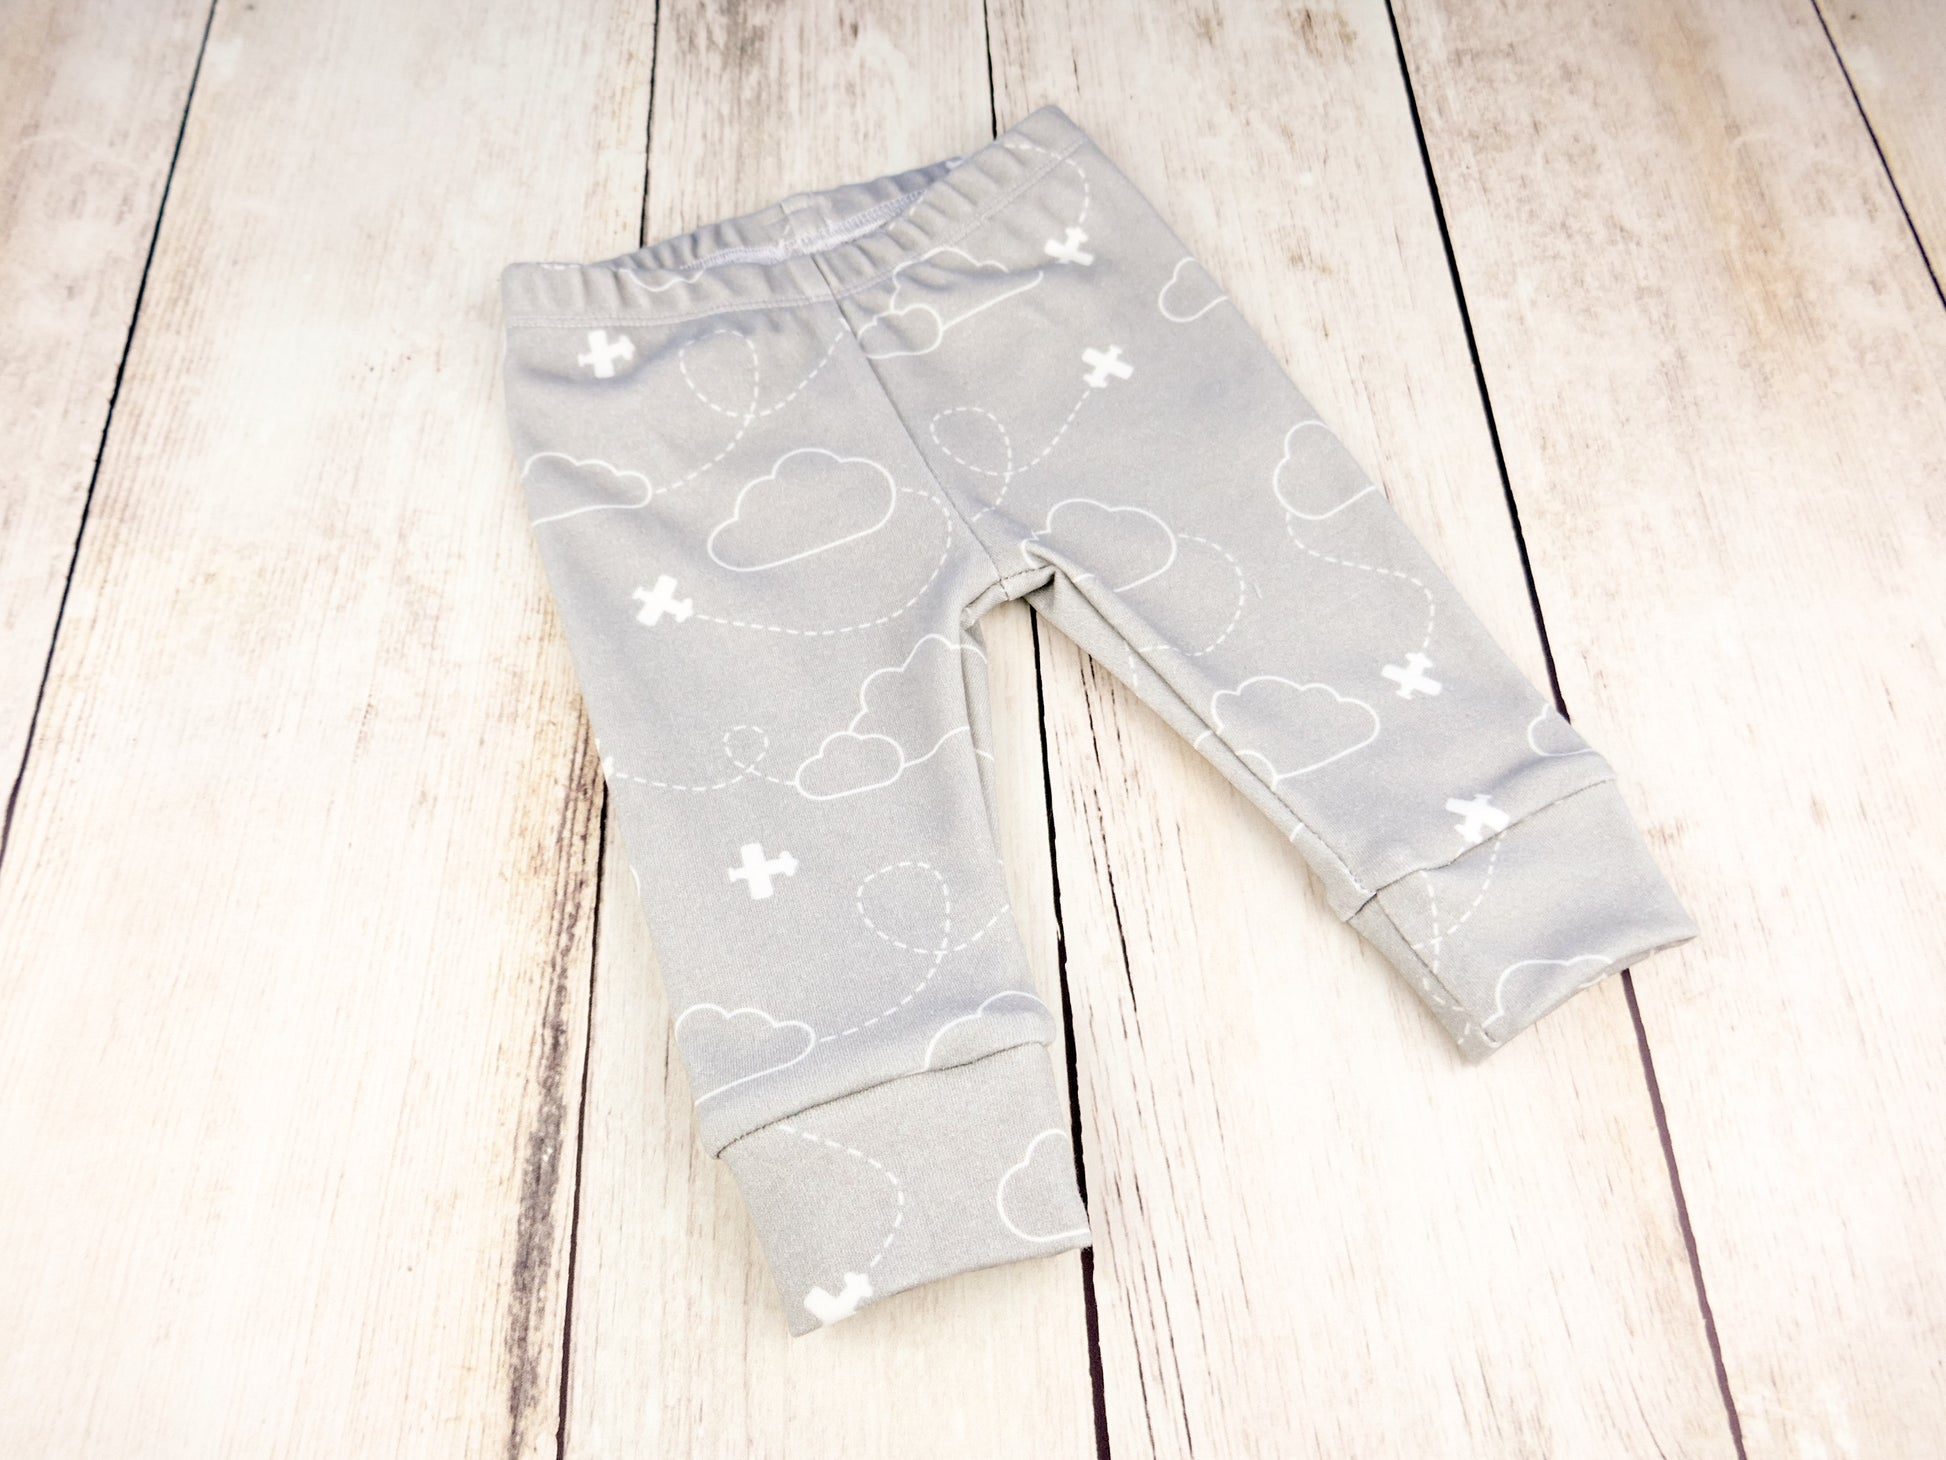 Airplanes in Clouds Organic Baby Leggings - White / Gray - CAVU Creations